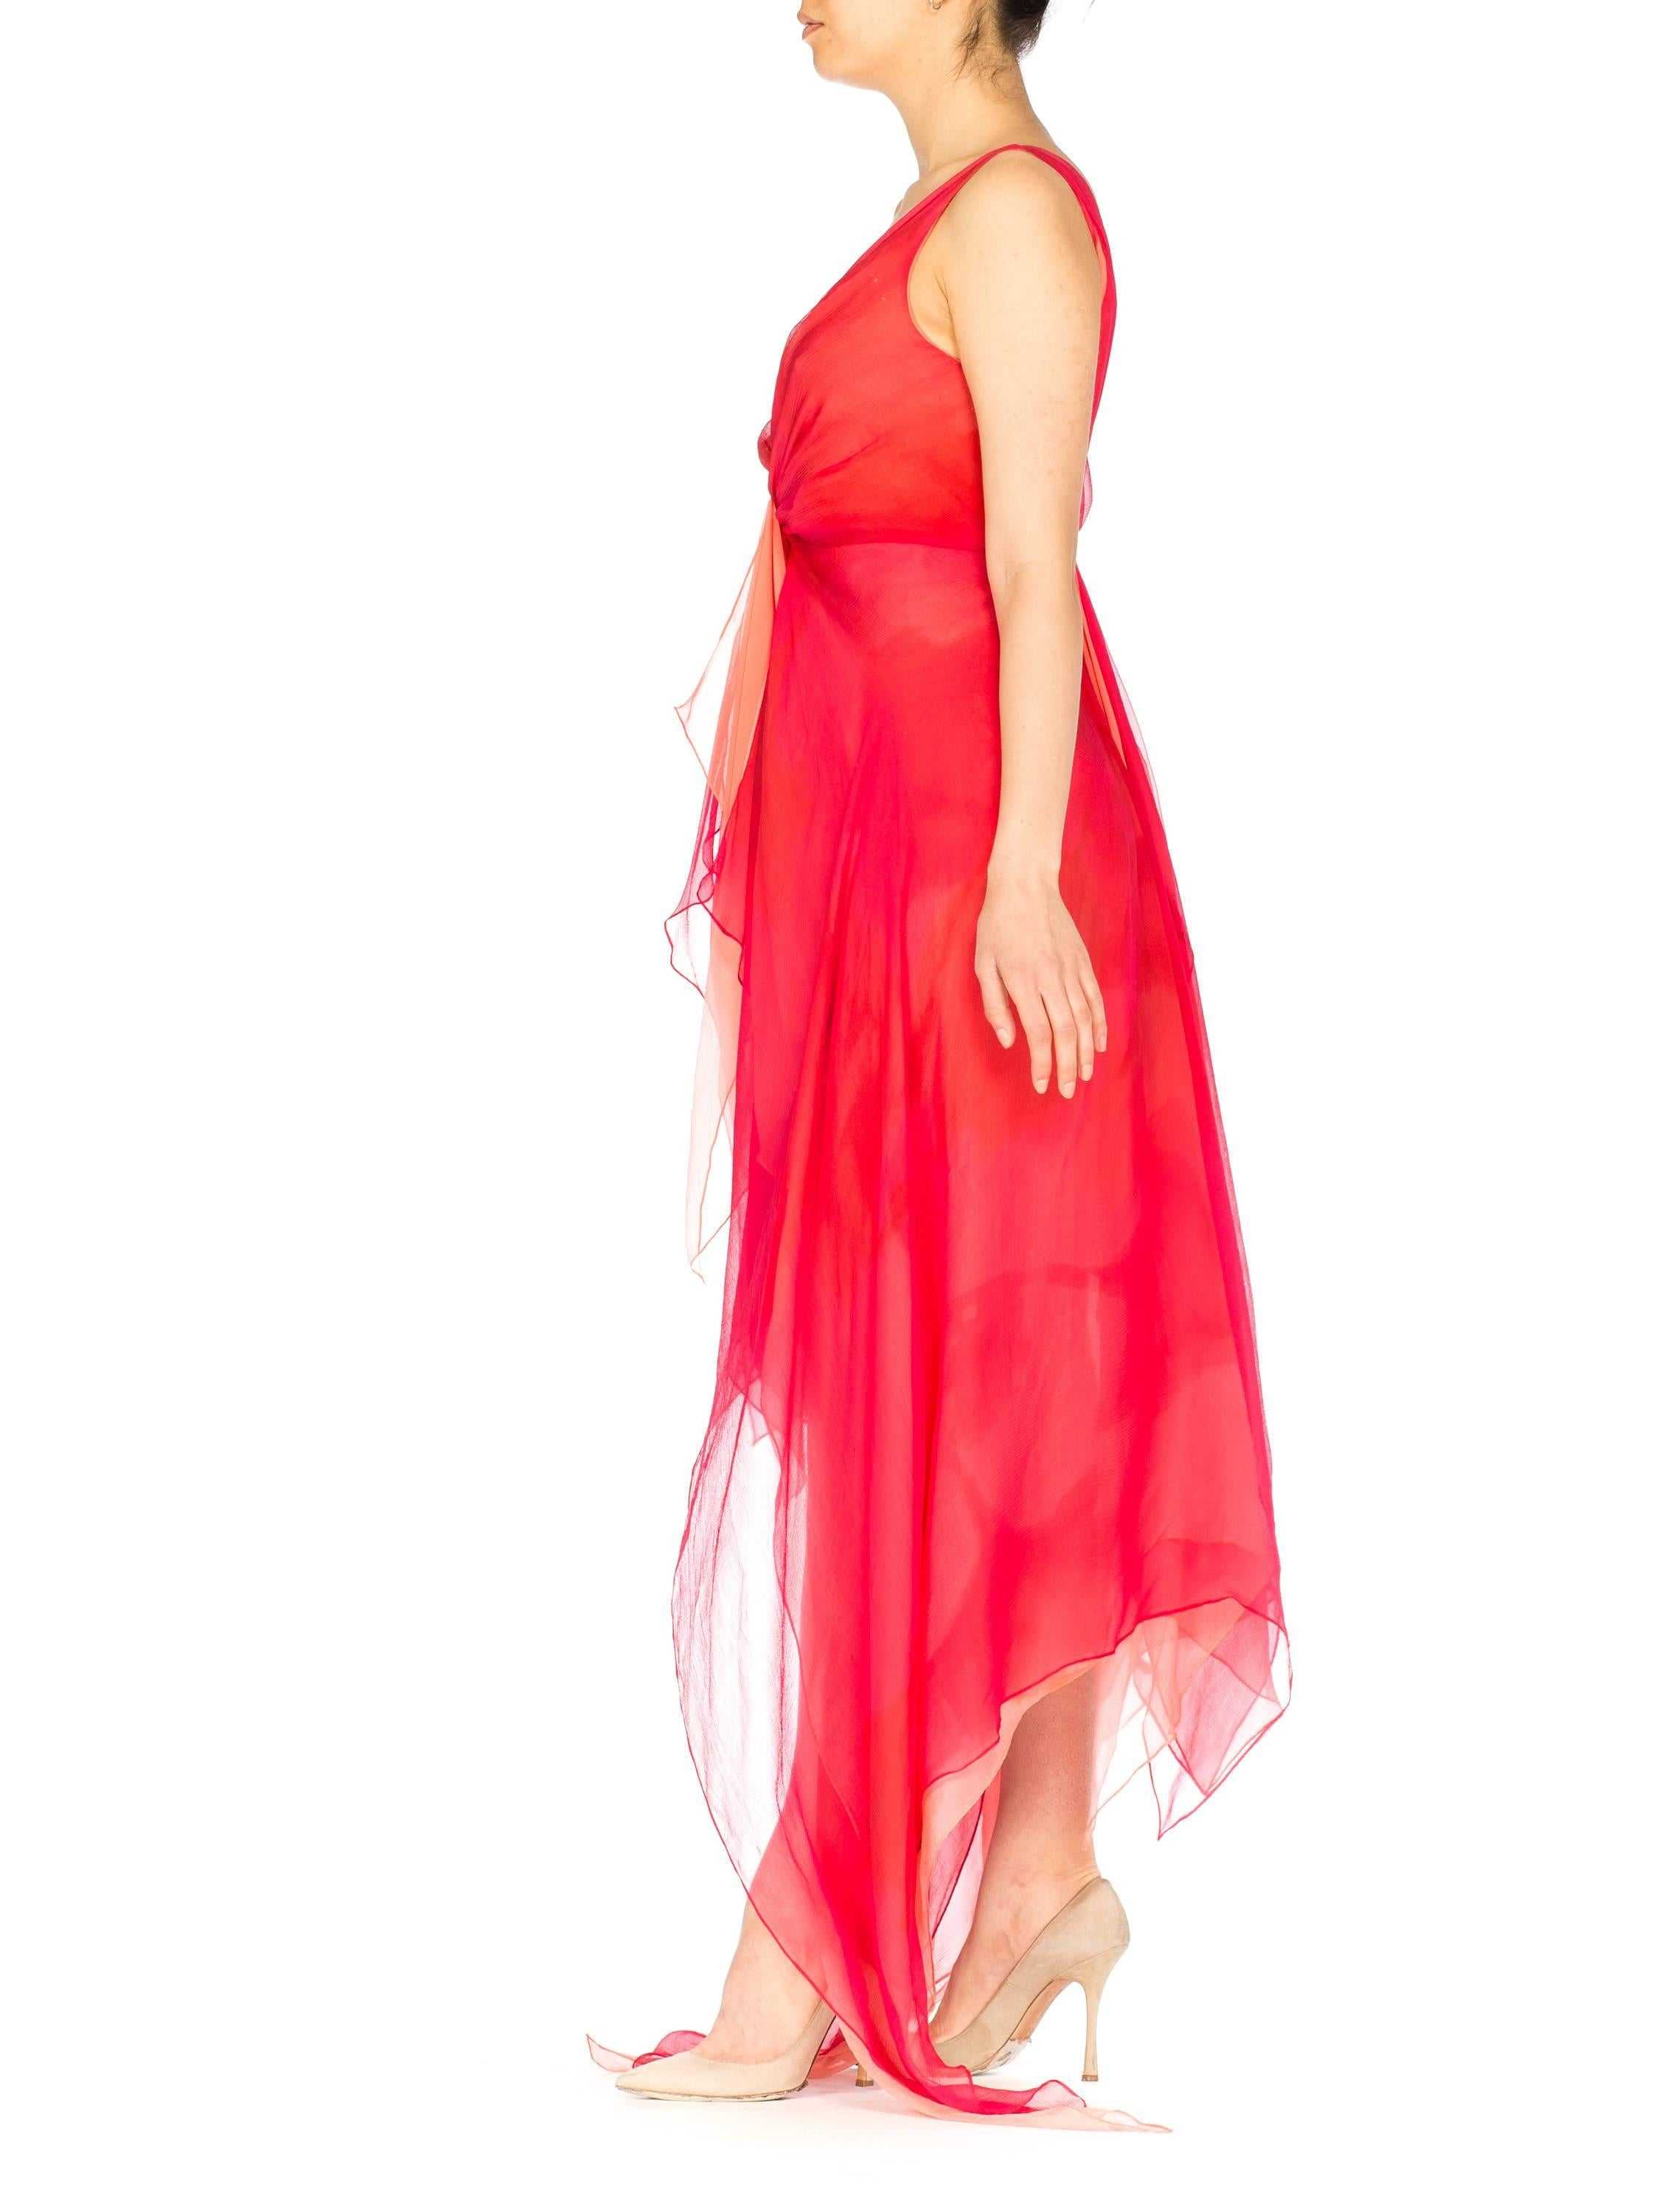 Donna Karan Layers of Red and Pink Chiffon Gown, 1990s  1